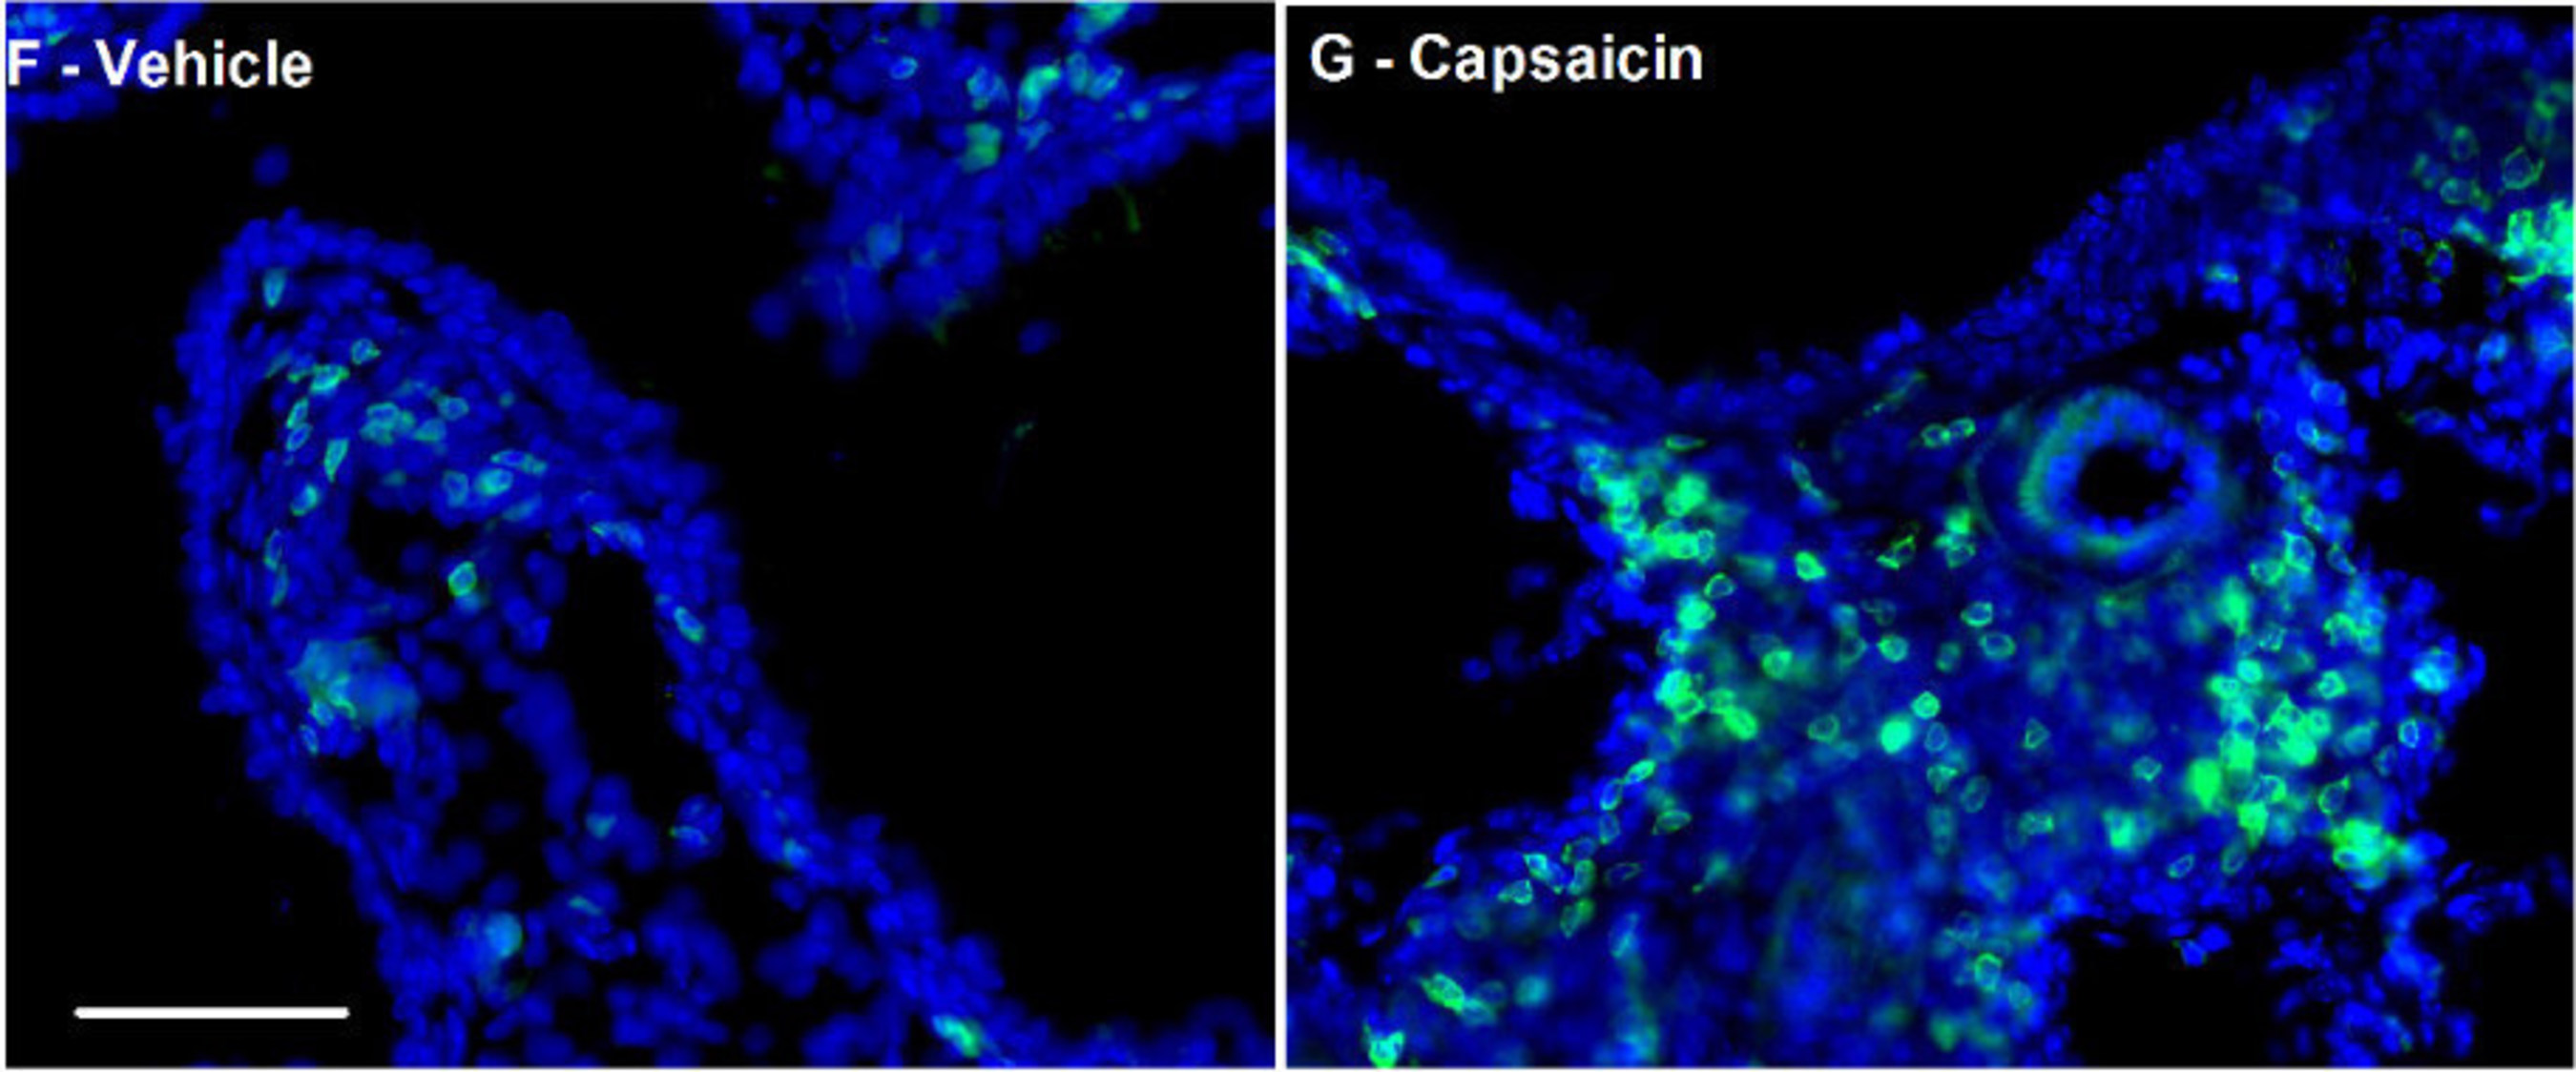 Activation of nociceptors, done for study purposes with a compound called capsaicin, promotes the infiltration of immune cells into the lung (right) as compared with control (left).